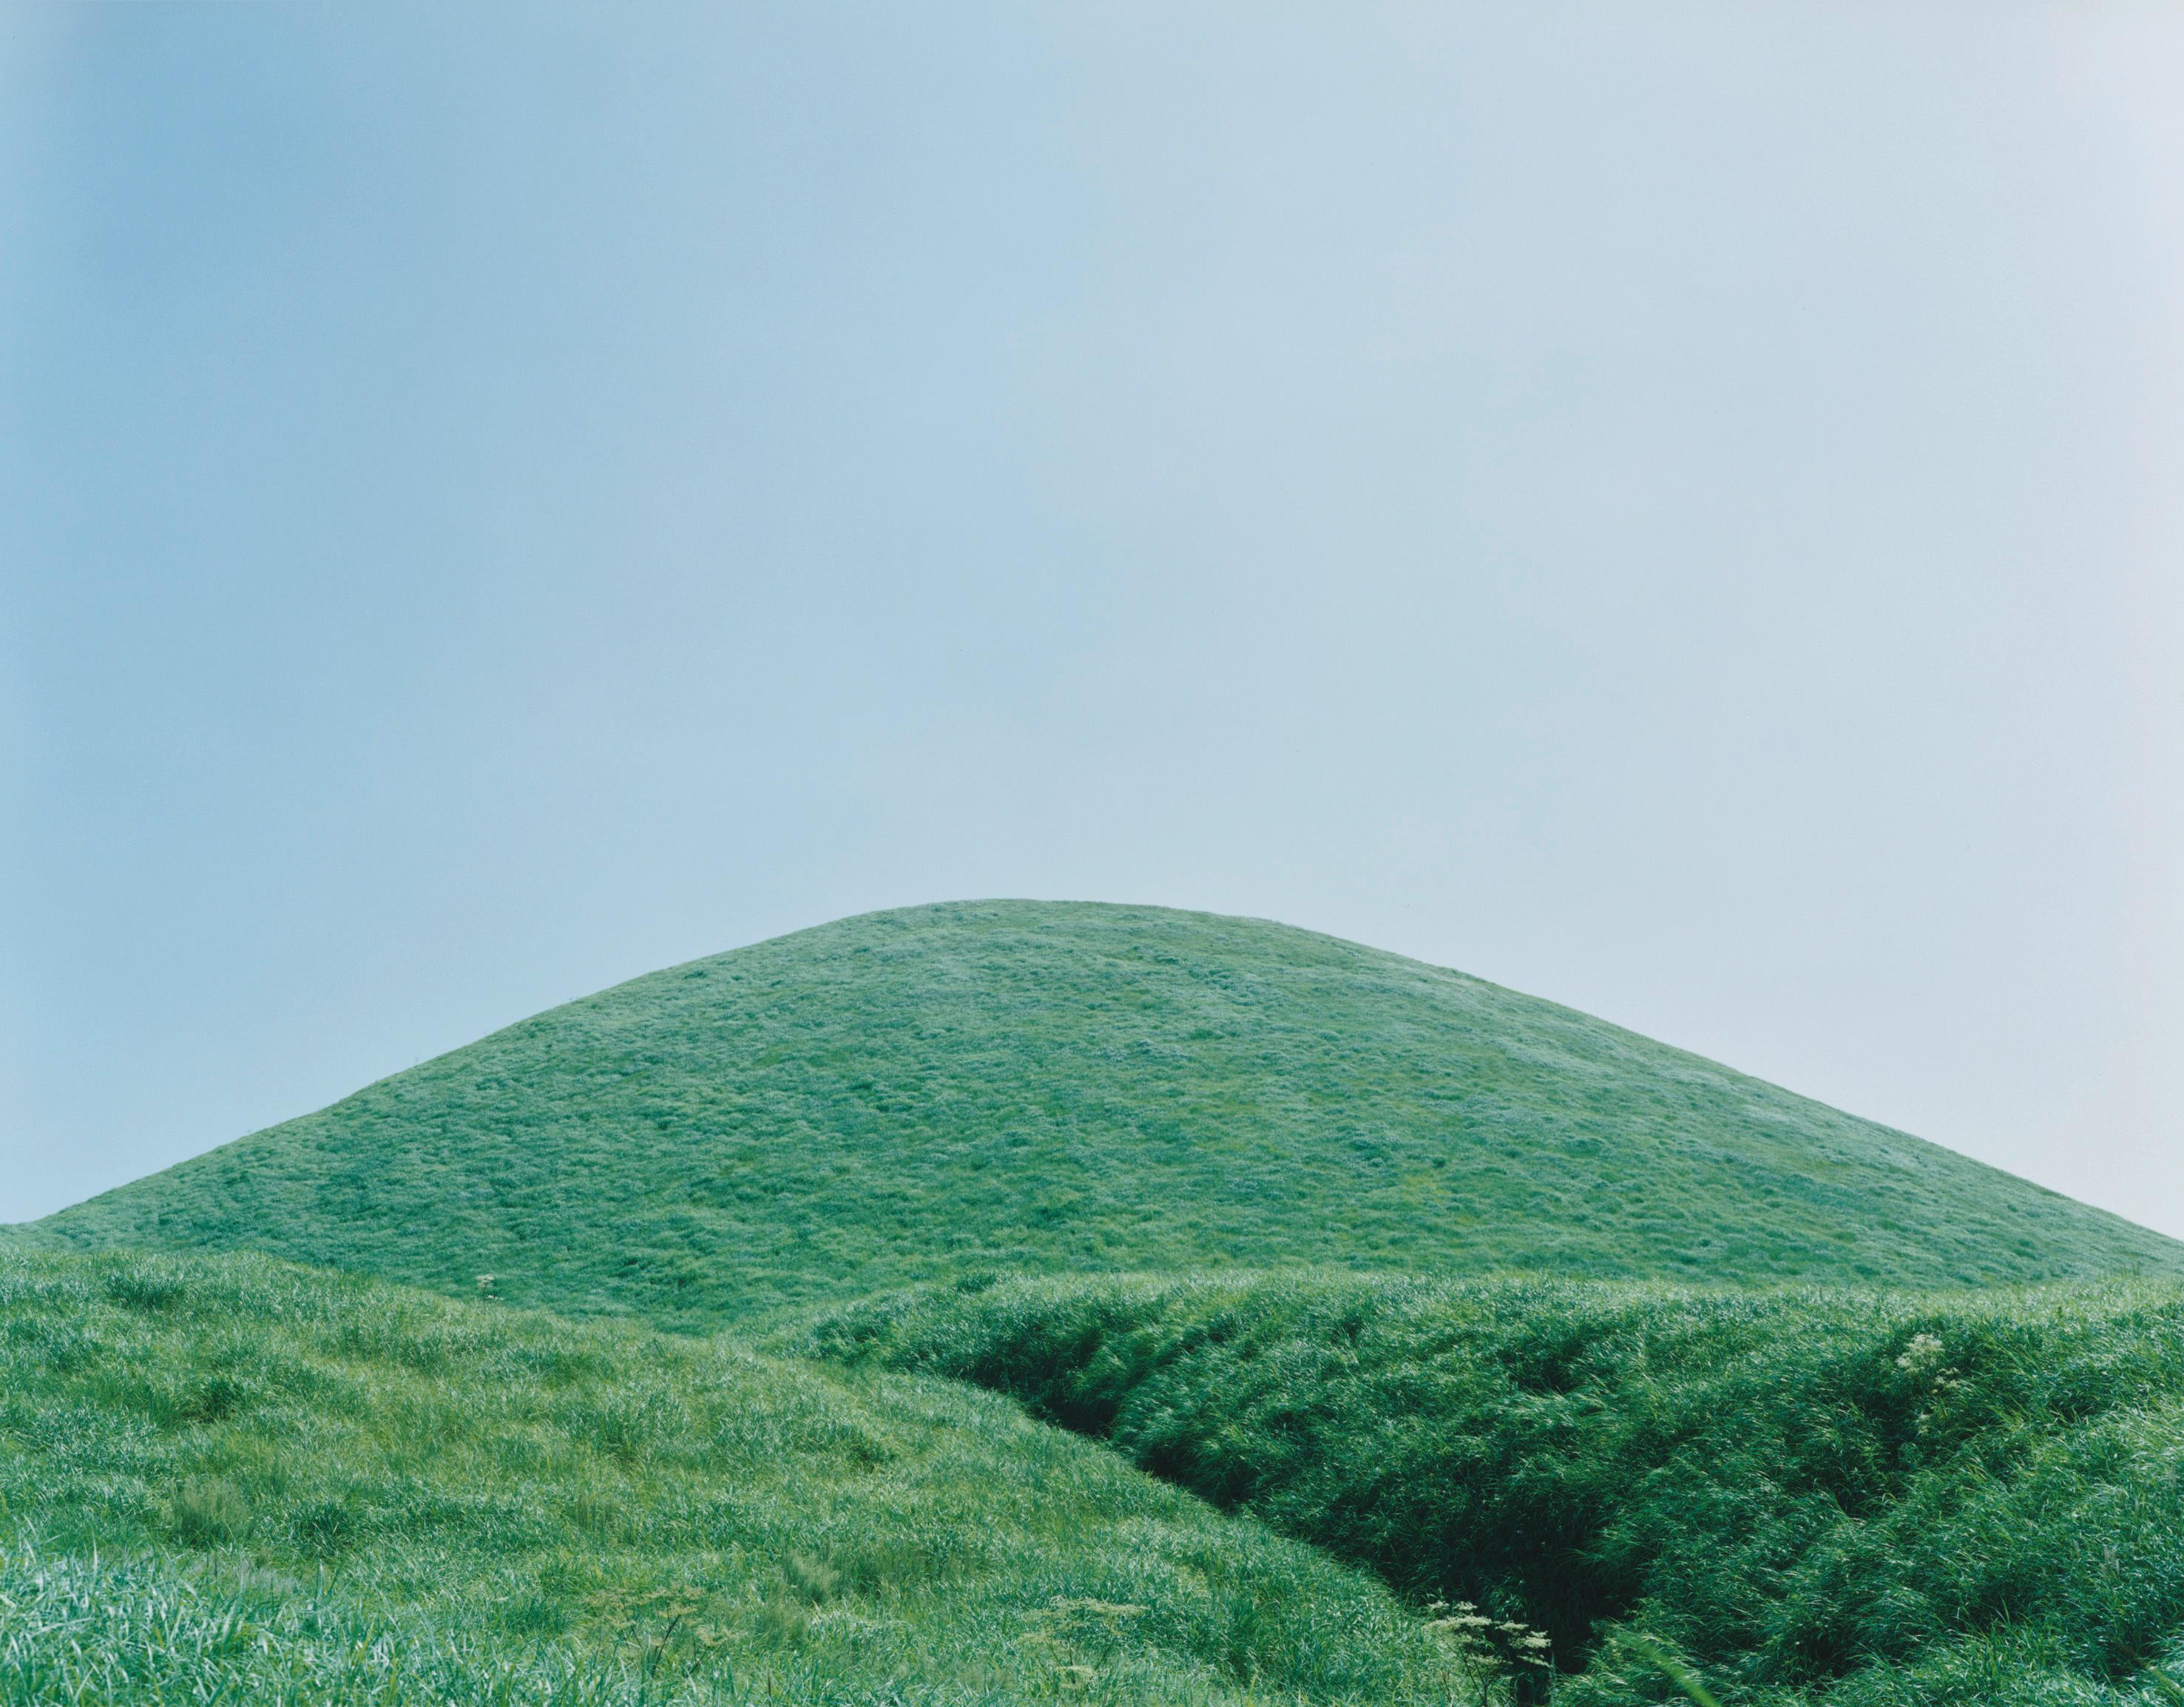 Rinko KAWAUCHI (*1972, Japan)
Untitled, from the series 'Ametsuchi', 2013
Lambda print
Sheet 148 x 185 cm (58 1/4 x 72 7/8 in.) 
Edition of 3; Ed. no. 2/3
Print only

Kawauchi, currently one of the most famed contemporary female Asian artists, is a